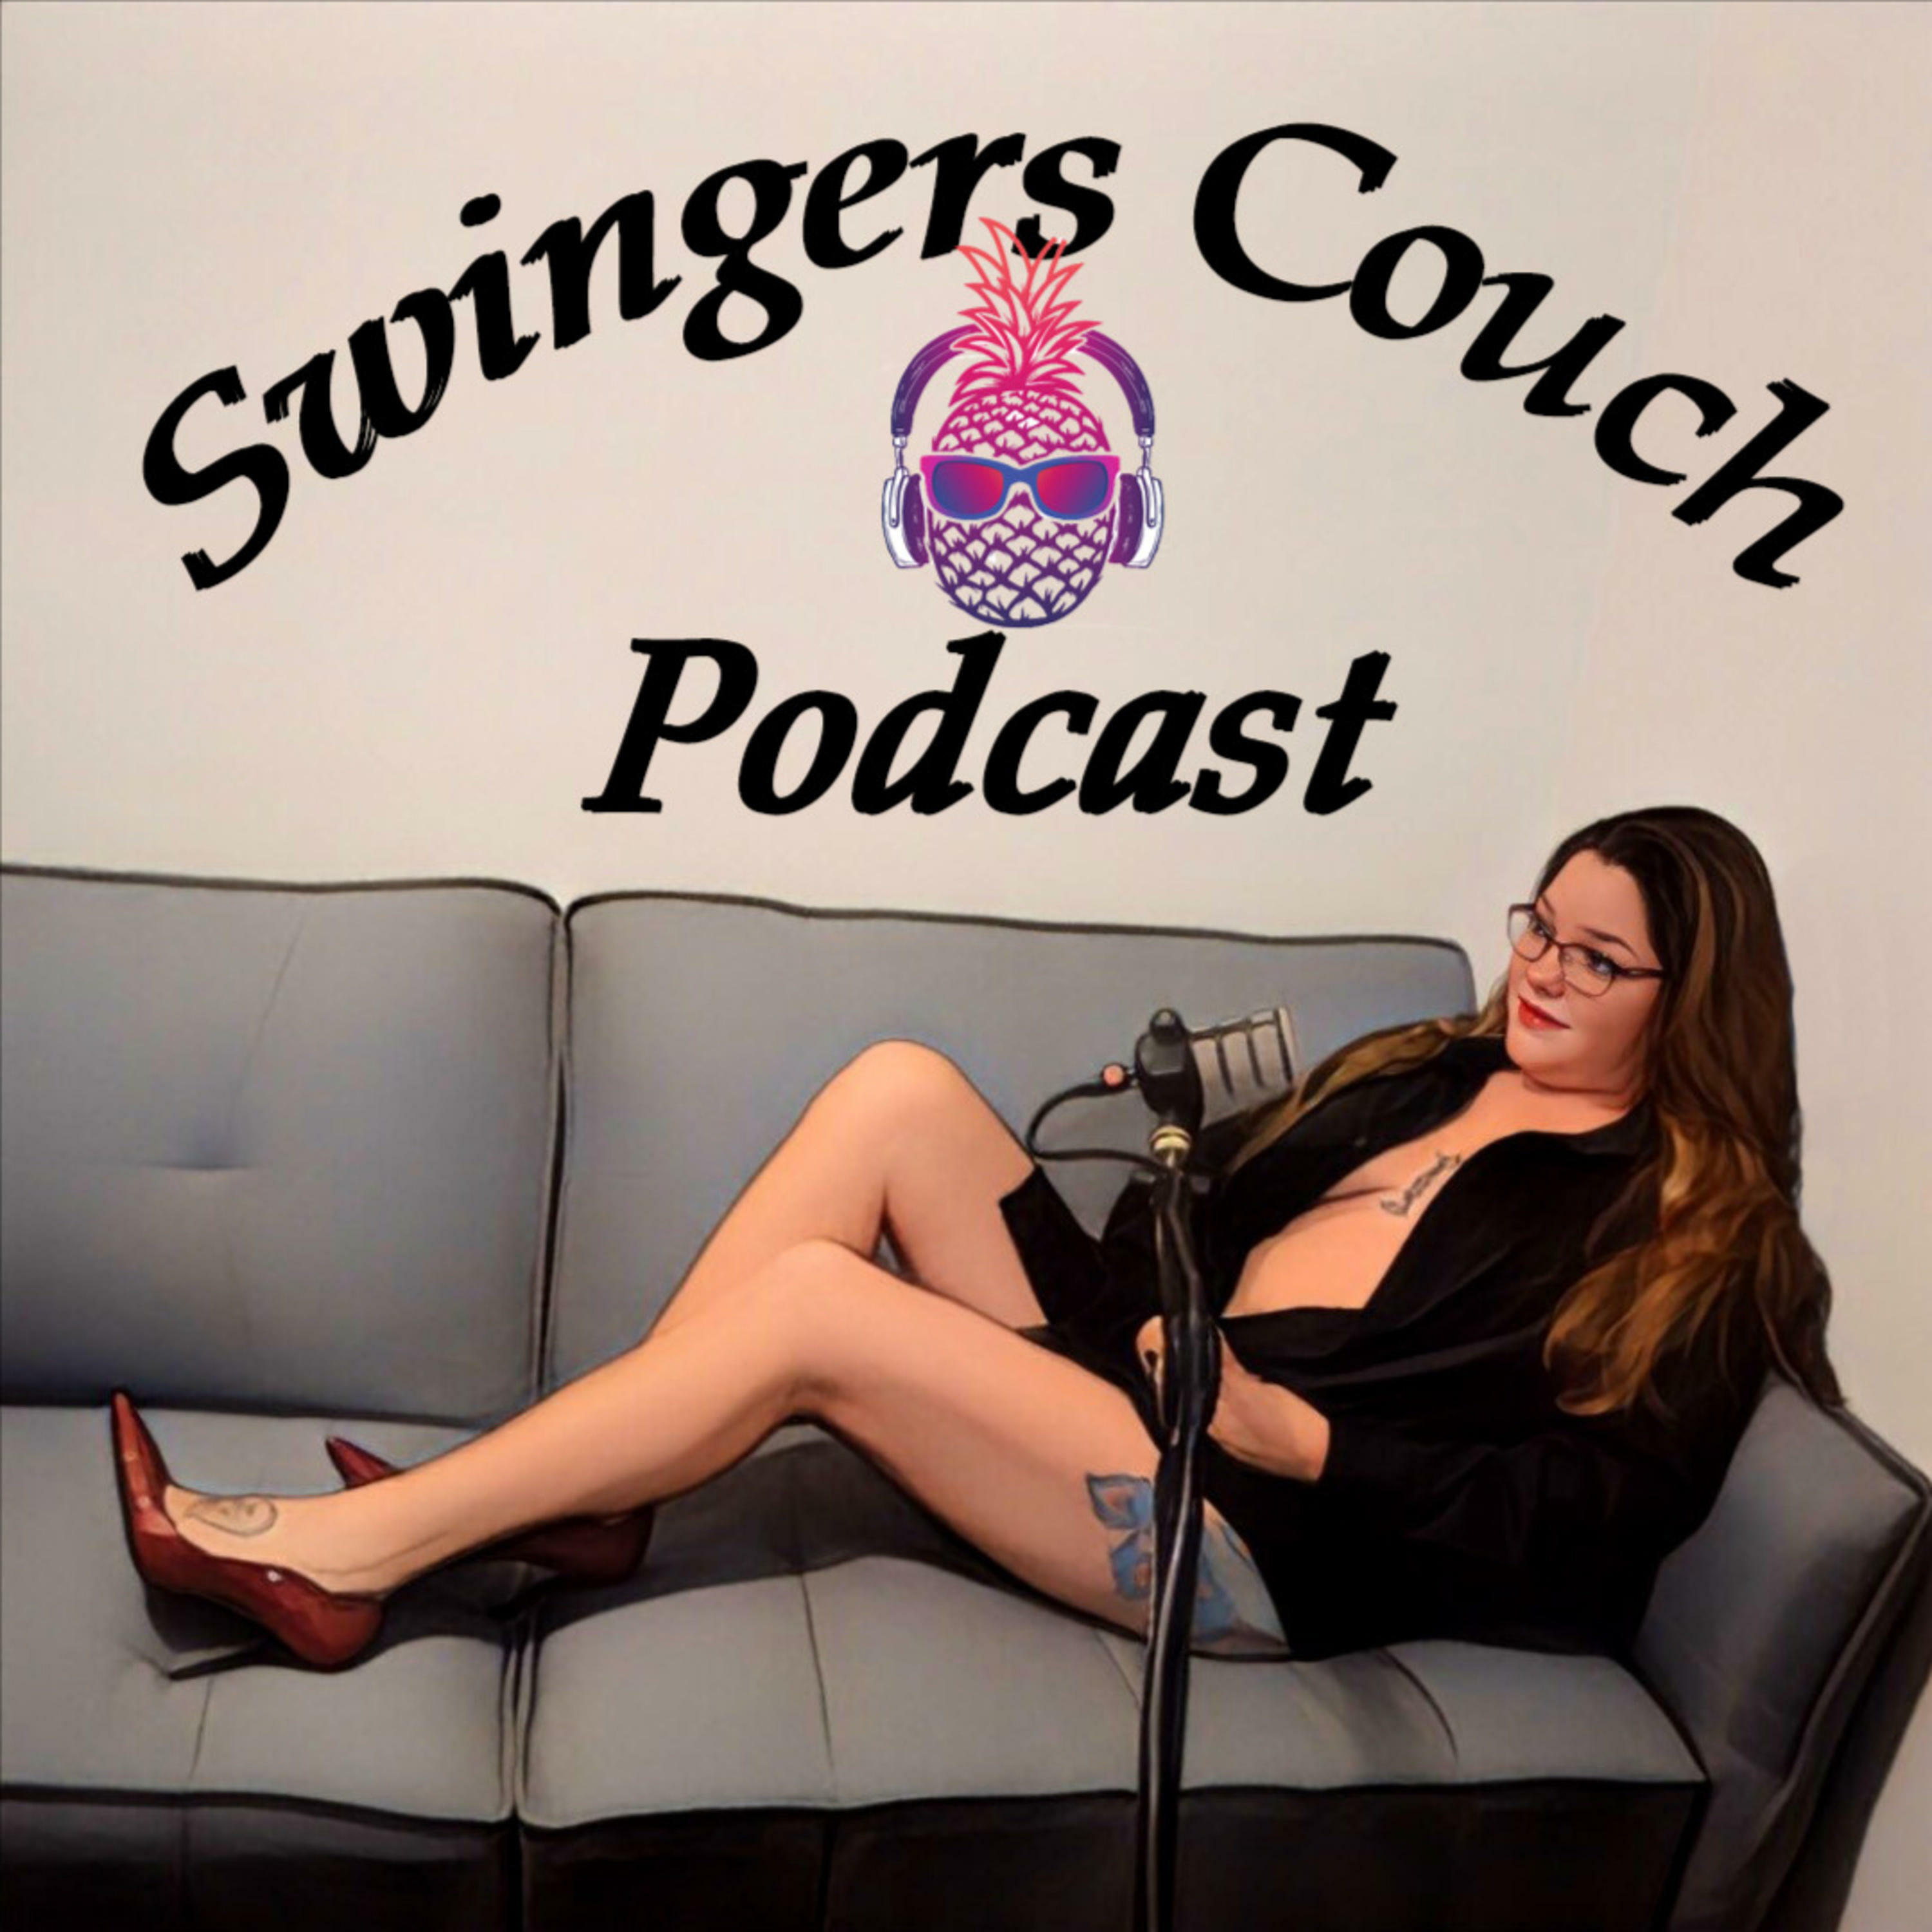 ♫ swingers couch podcast Swingers couch podcast was created to share our sexy stories and help people by answering some of their questions about the Lifestyle picture image